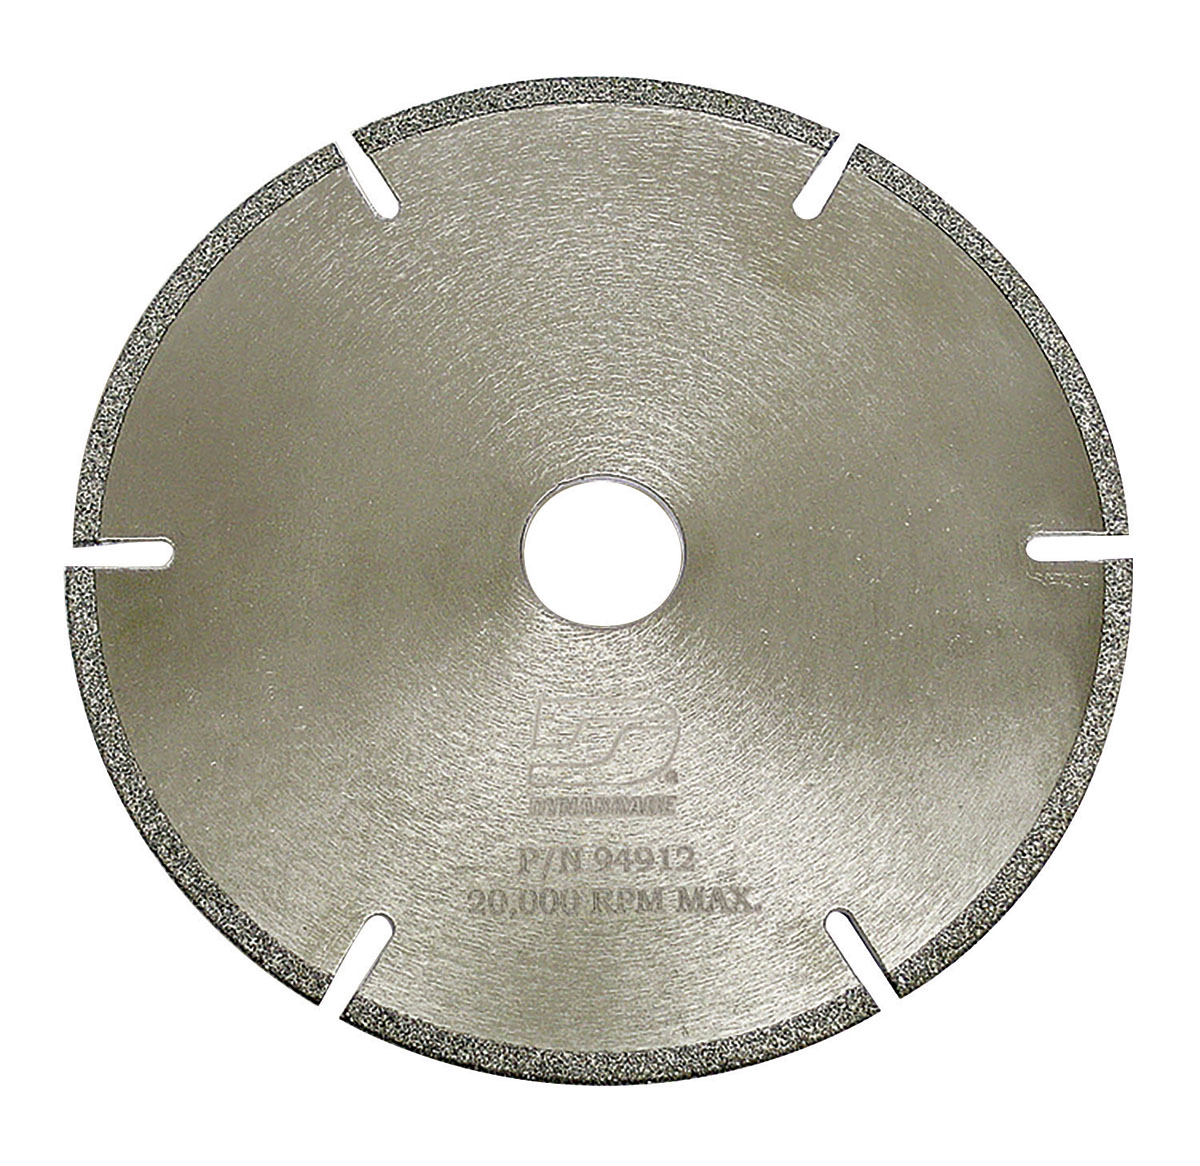 4-1/2" (114 mm) Dia. x 3/8" (10 mm) CH 40/50 Grit Gulleted/Slotted Diamond Cut-Off Wheel